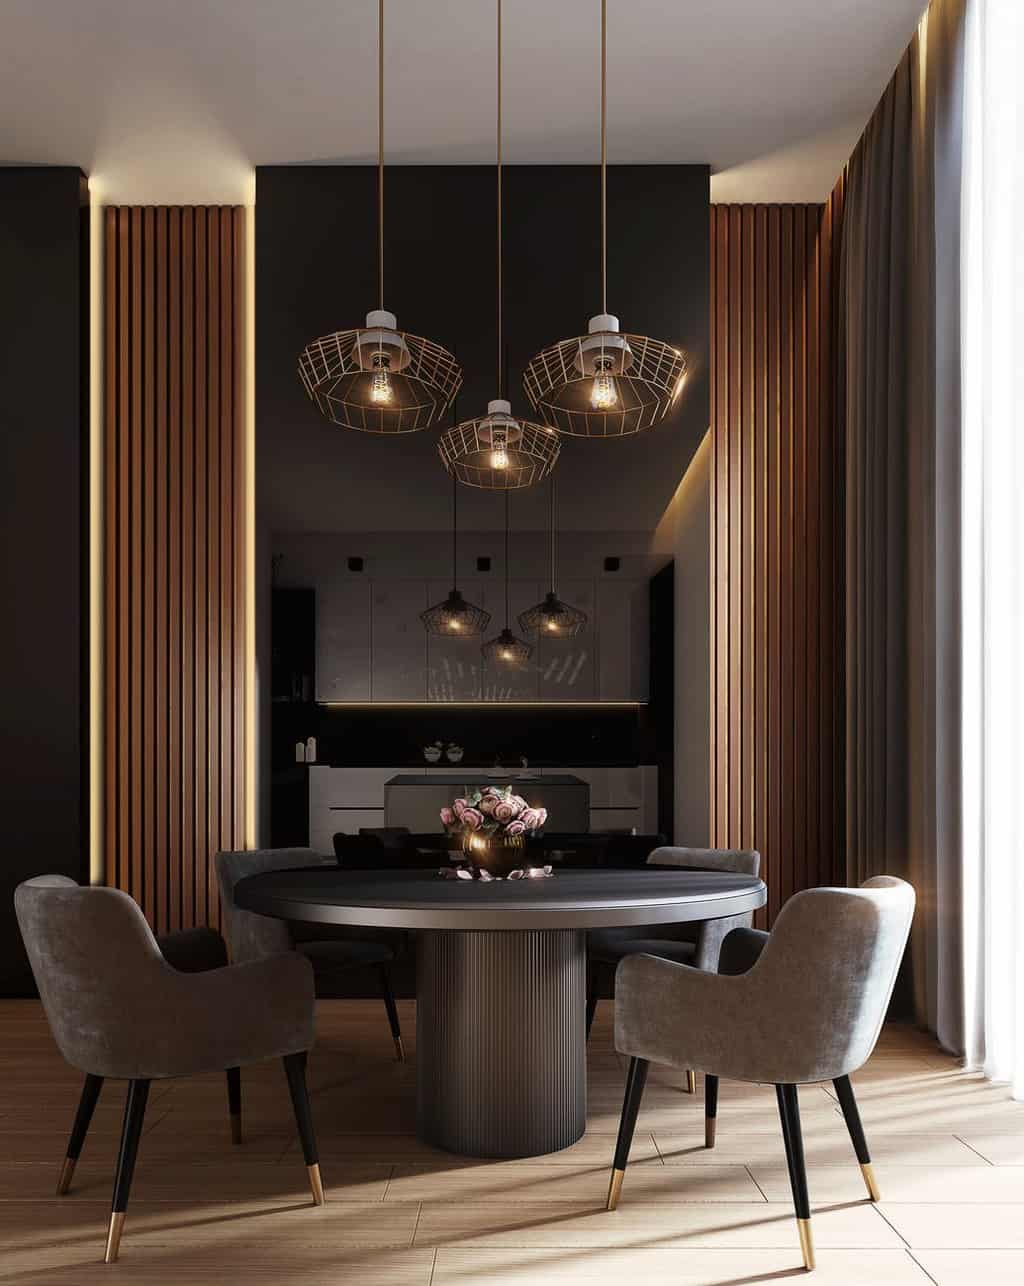 gray dining table under pendant lamps